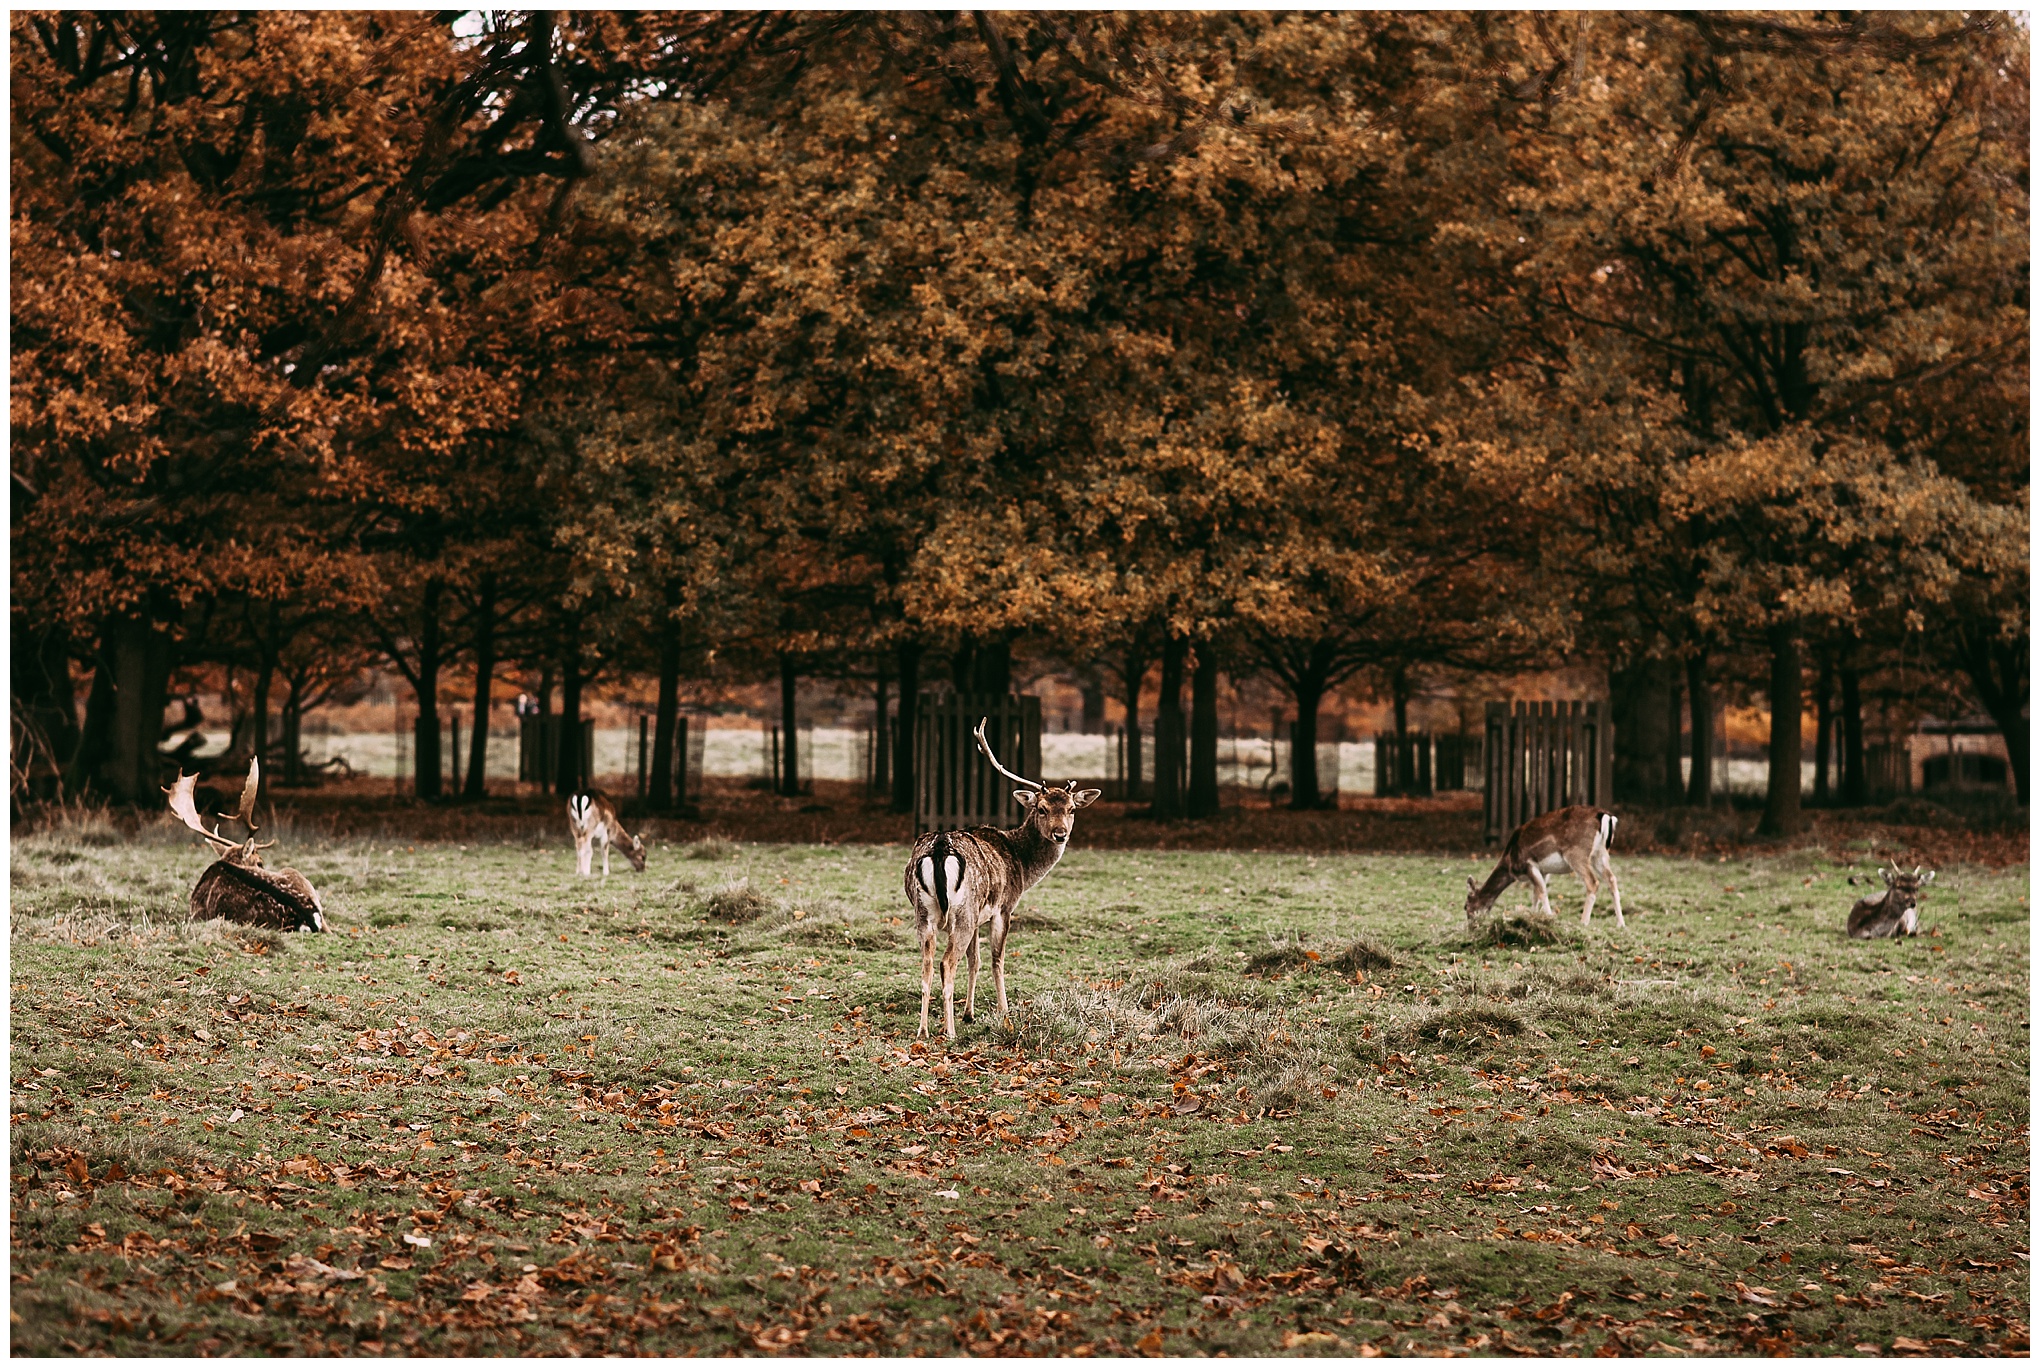 Deers in the Park at Dunham Massey